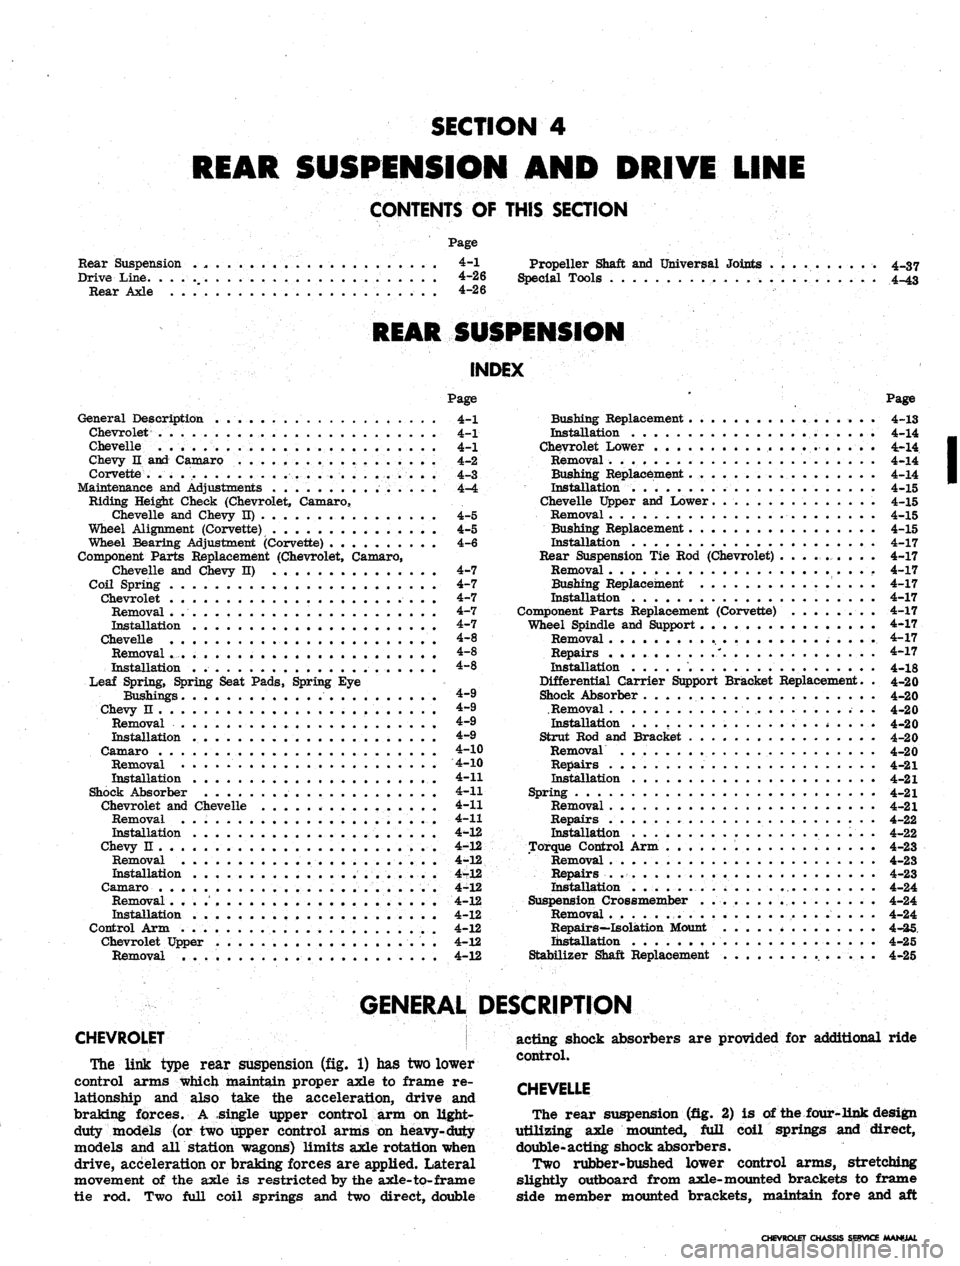 CHEVROLET CAMARO 1967 1.G Chassis Workshop Manual 
SECTION
 4

REAR SUSPENSION
 AND
 DRIVE LINE

CONTENTS
 OF
 THIS SECTION

Page

Rear Suspension
 4-1

Drive Line.
 . 4-26

Rear Axle ......
 4-26 
Propeller Shaft
 and
 Universal Joints

Special Tool